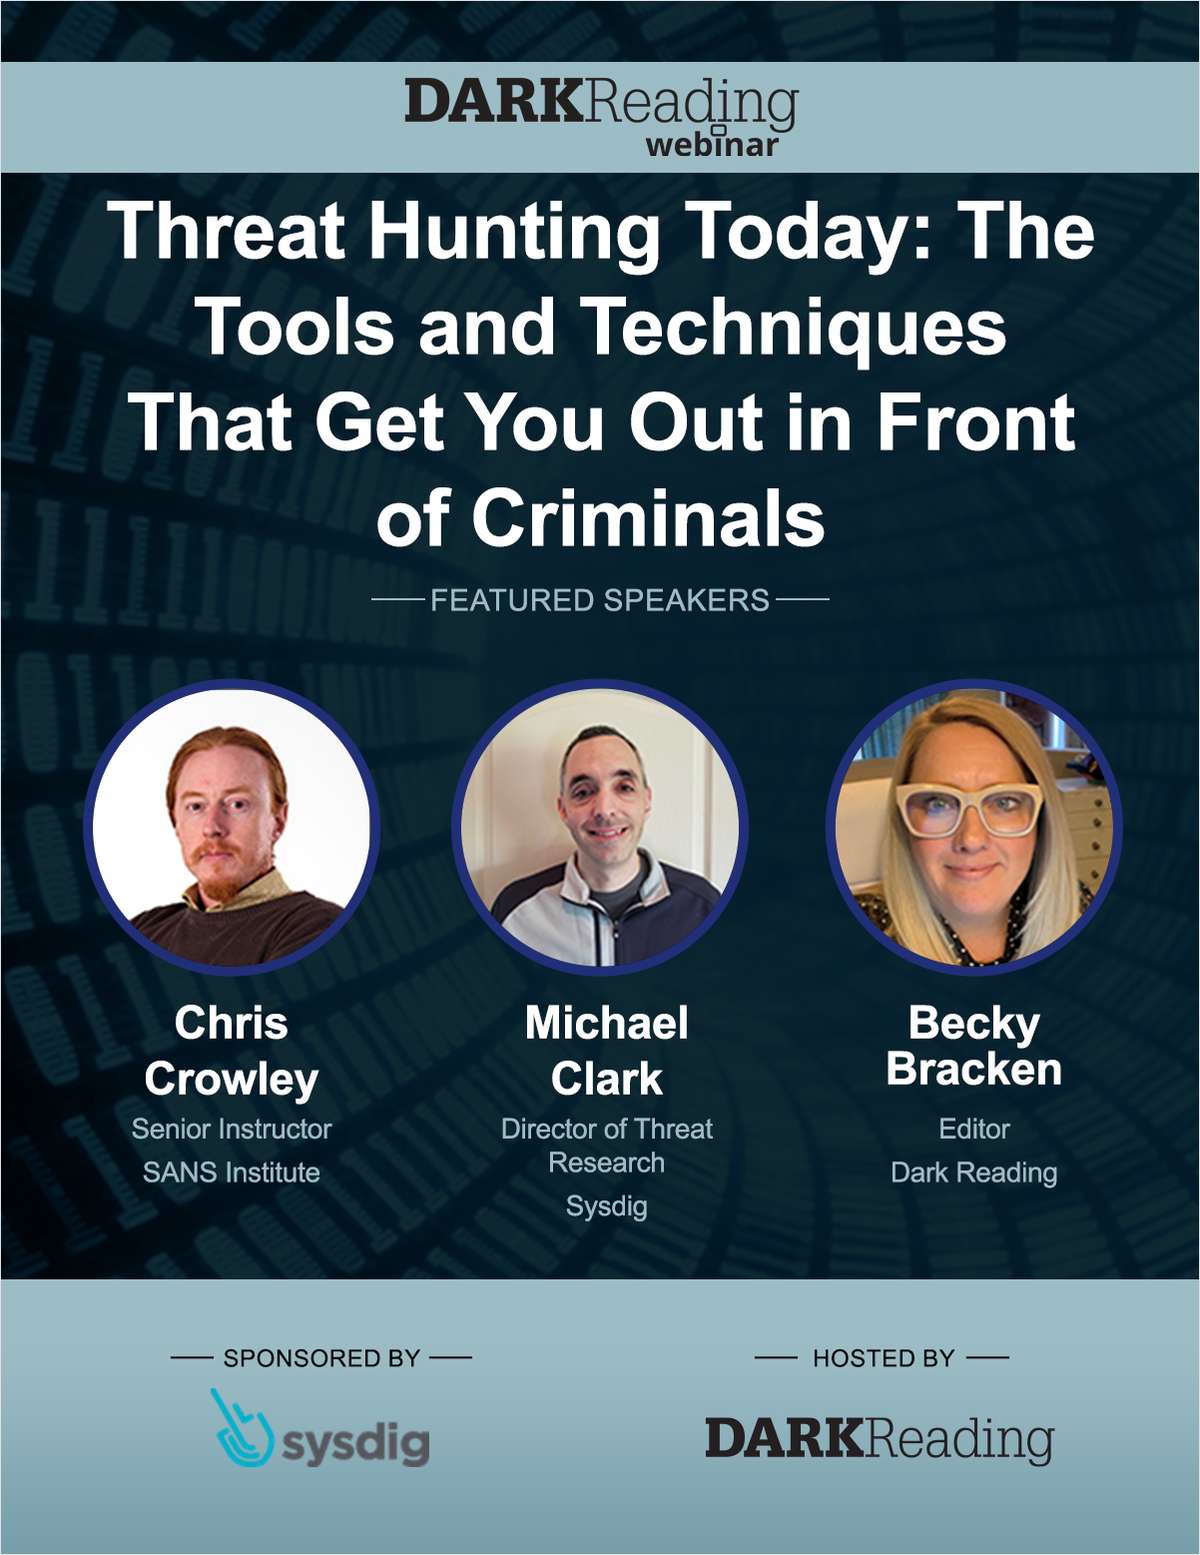 Threat Hunting Today: The Tools and Techniques That Get You Out in Front of Criminals